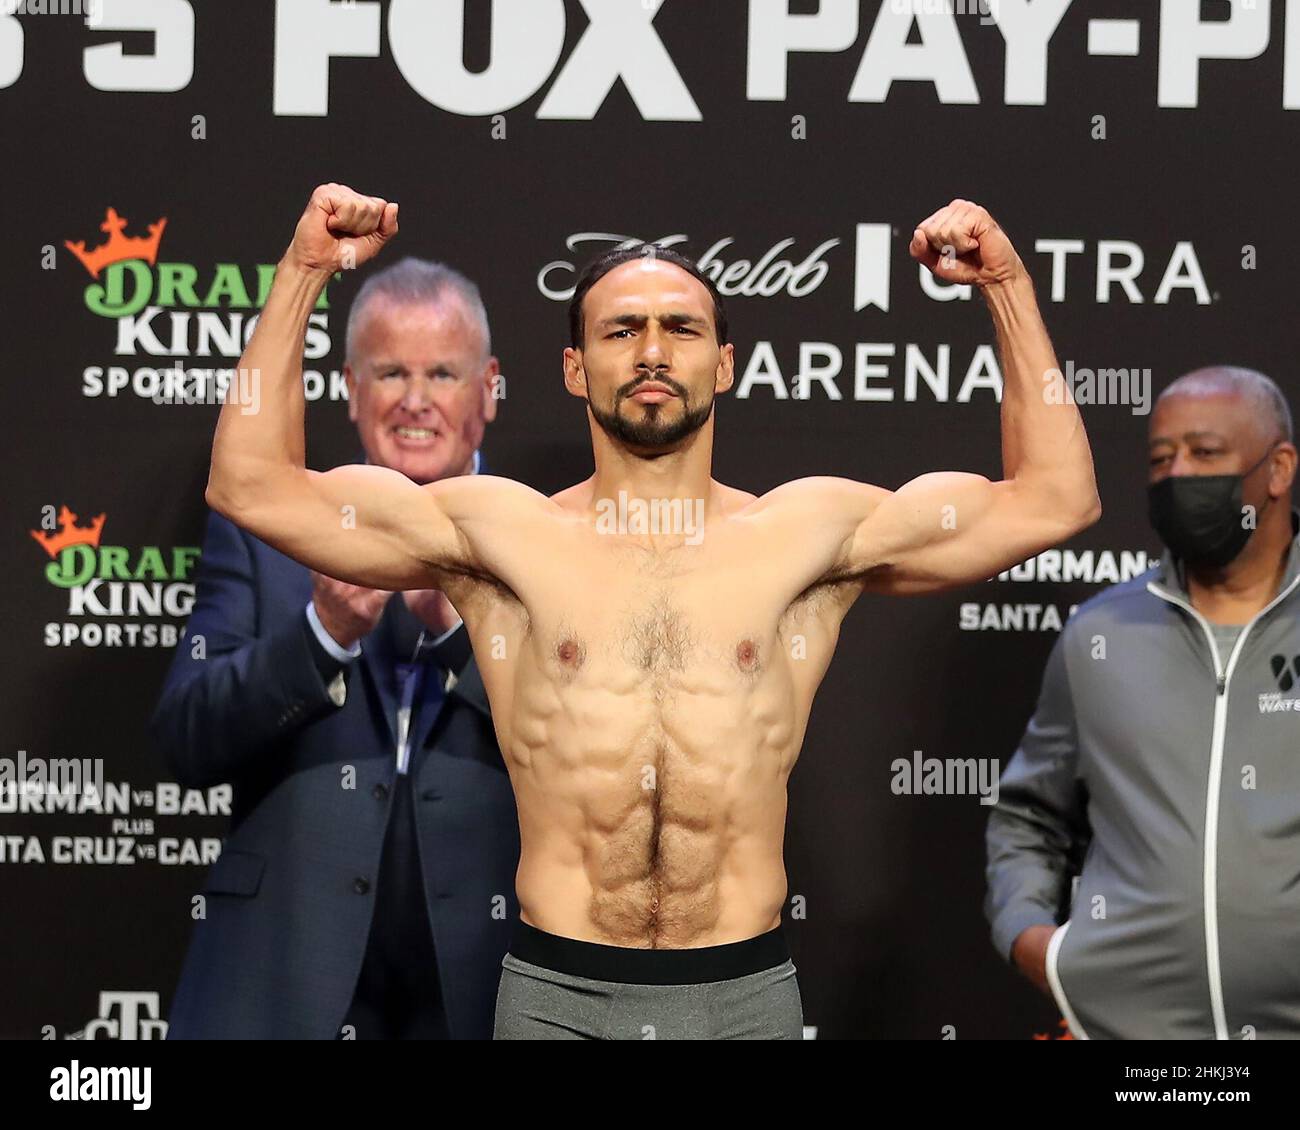 Las Vegas, USA. 04th Feb, 2022. LAS VEGAS, NV - FEBRUARY 4: Boxer Keith Thurman poses on the scale during the official weigh-in for his bout against Mario Barrios at the Mandalay Bay Michelob Ultra Arena February 5, 2022 in Las Vegas, Nevada. (Photo by Alejandro Salazar/PxImages) Credit: Px Images/Alamy Live News Stock Photo